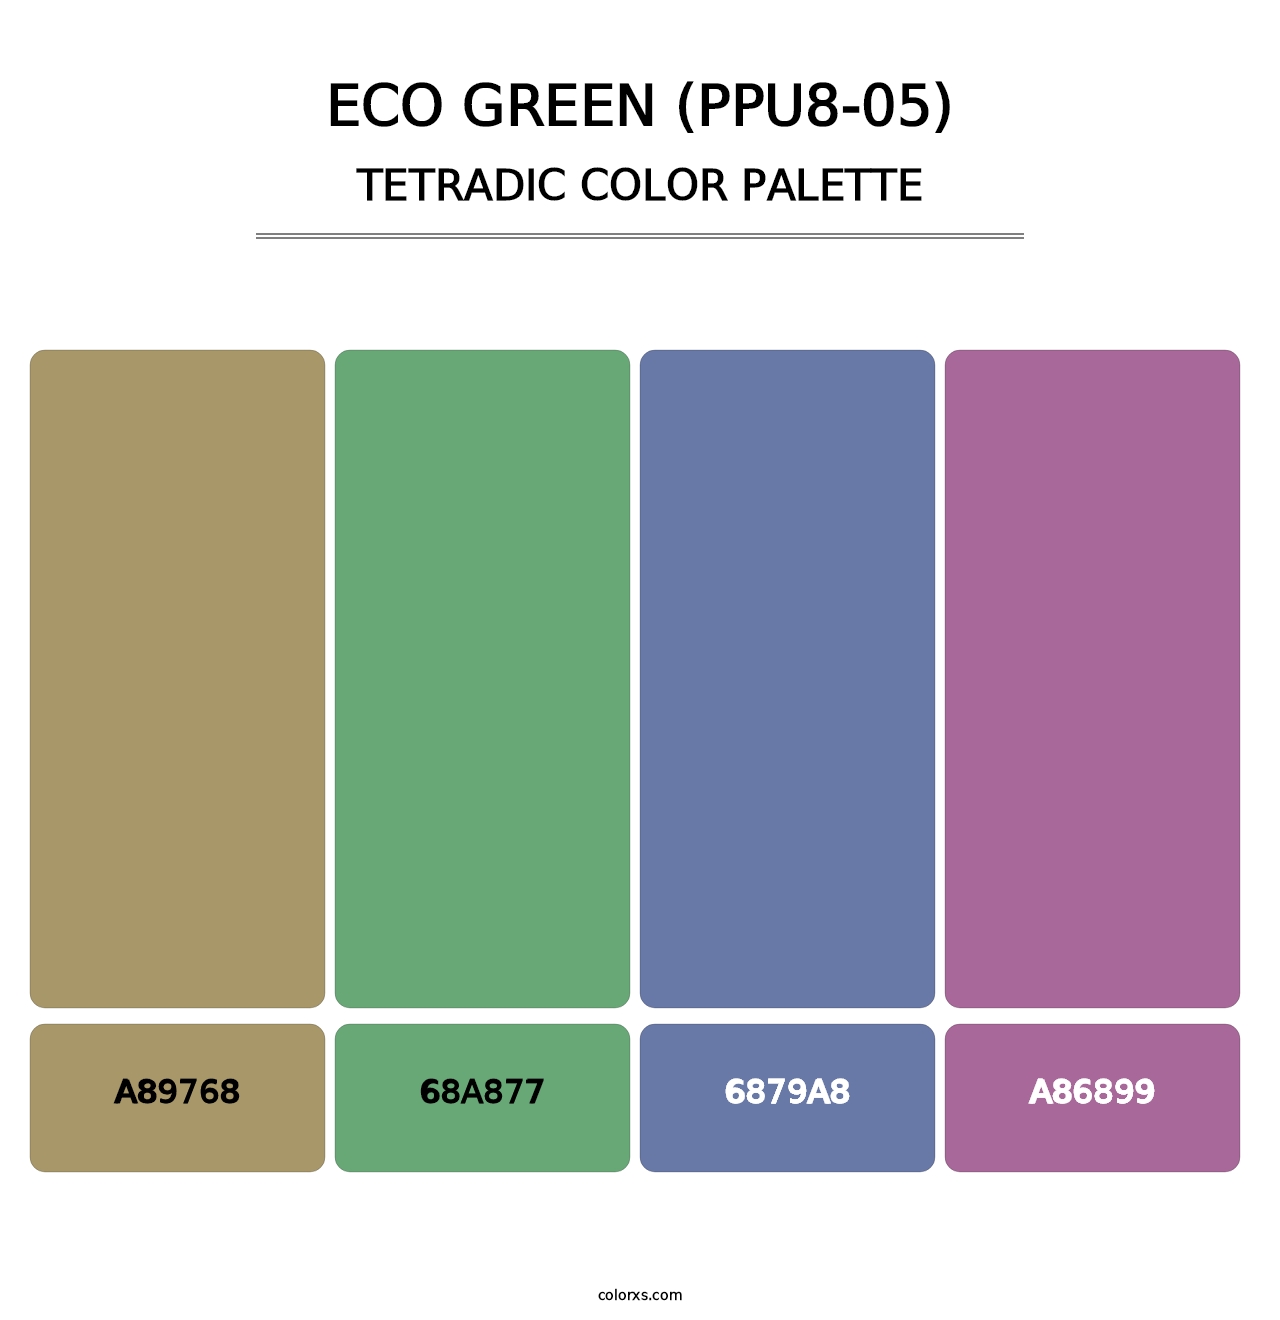 Eco Green (PPU8-05) - Tetradic Color Palette